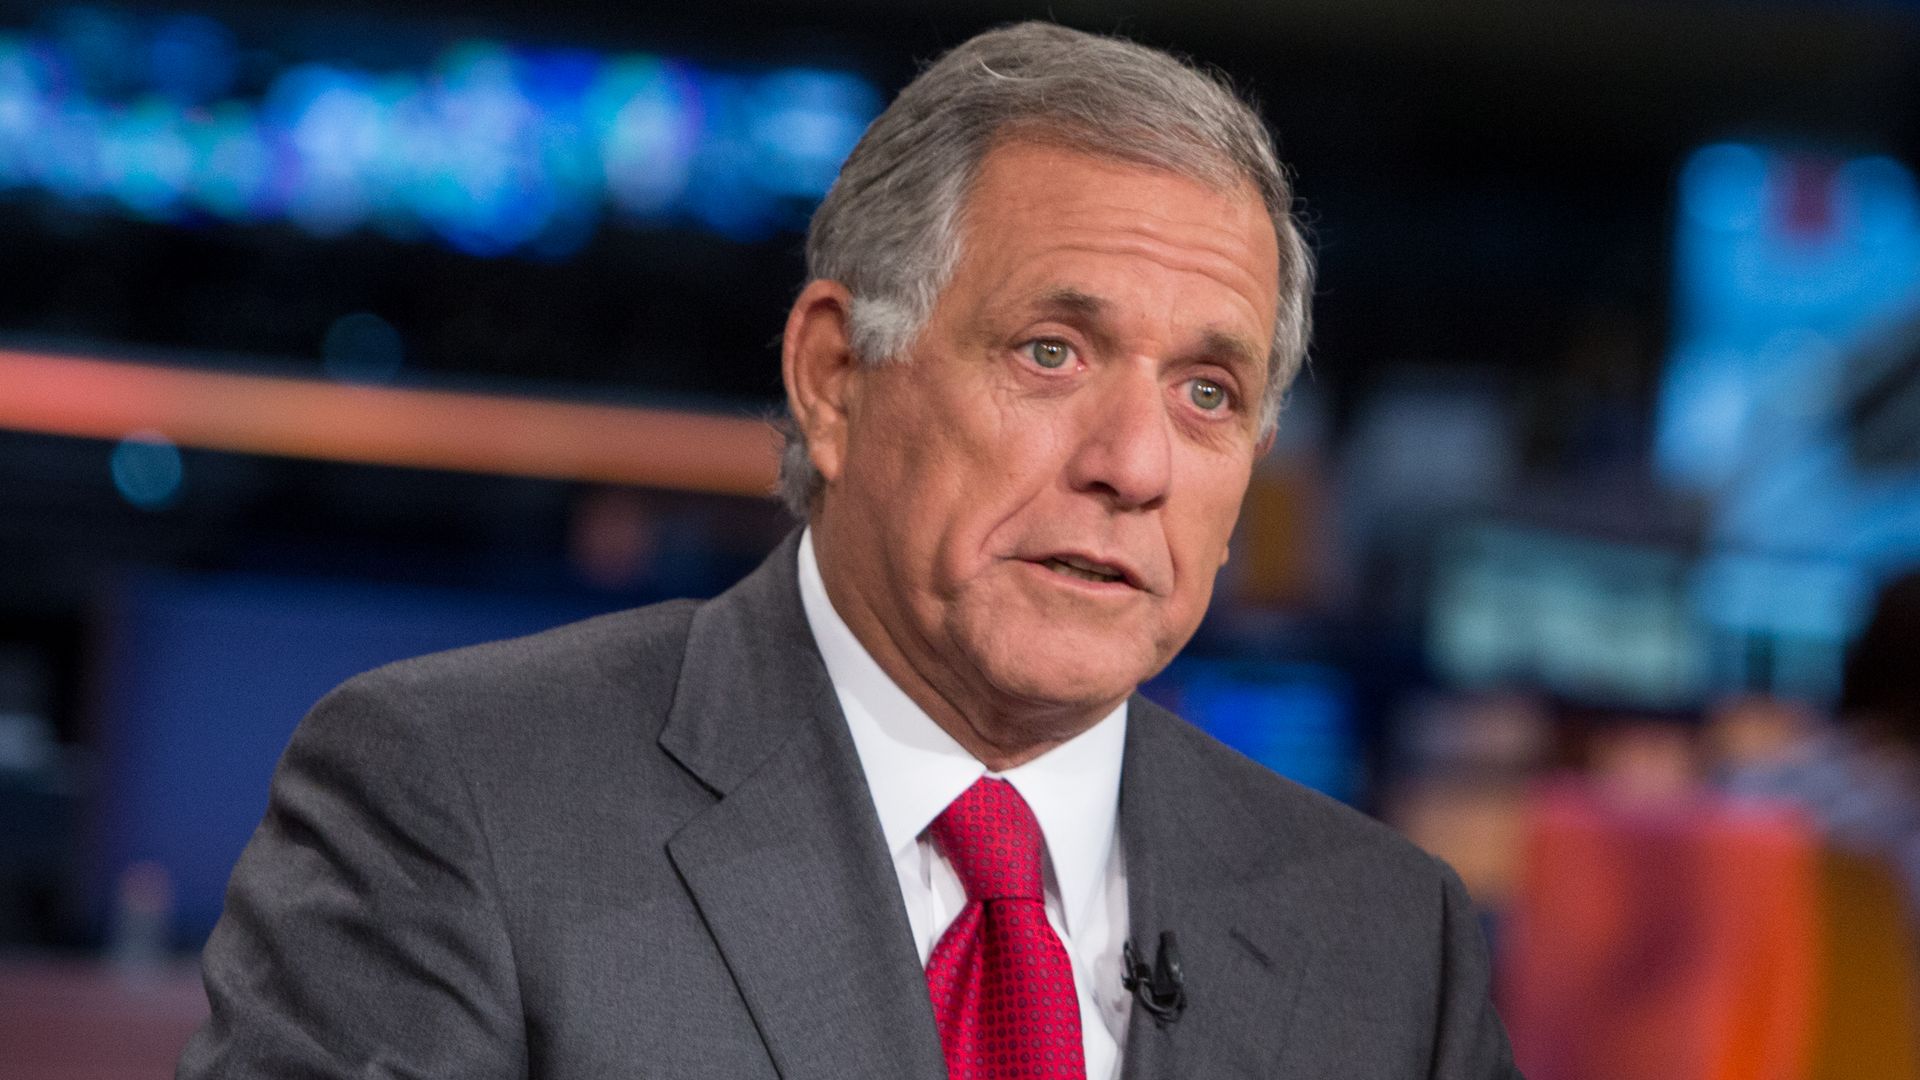 LEs Moonves wearing a gray suit and red tie. 